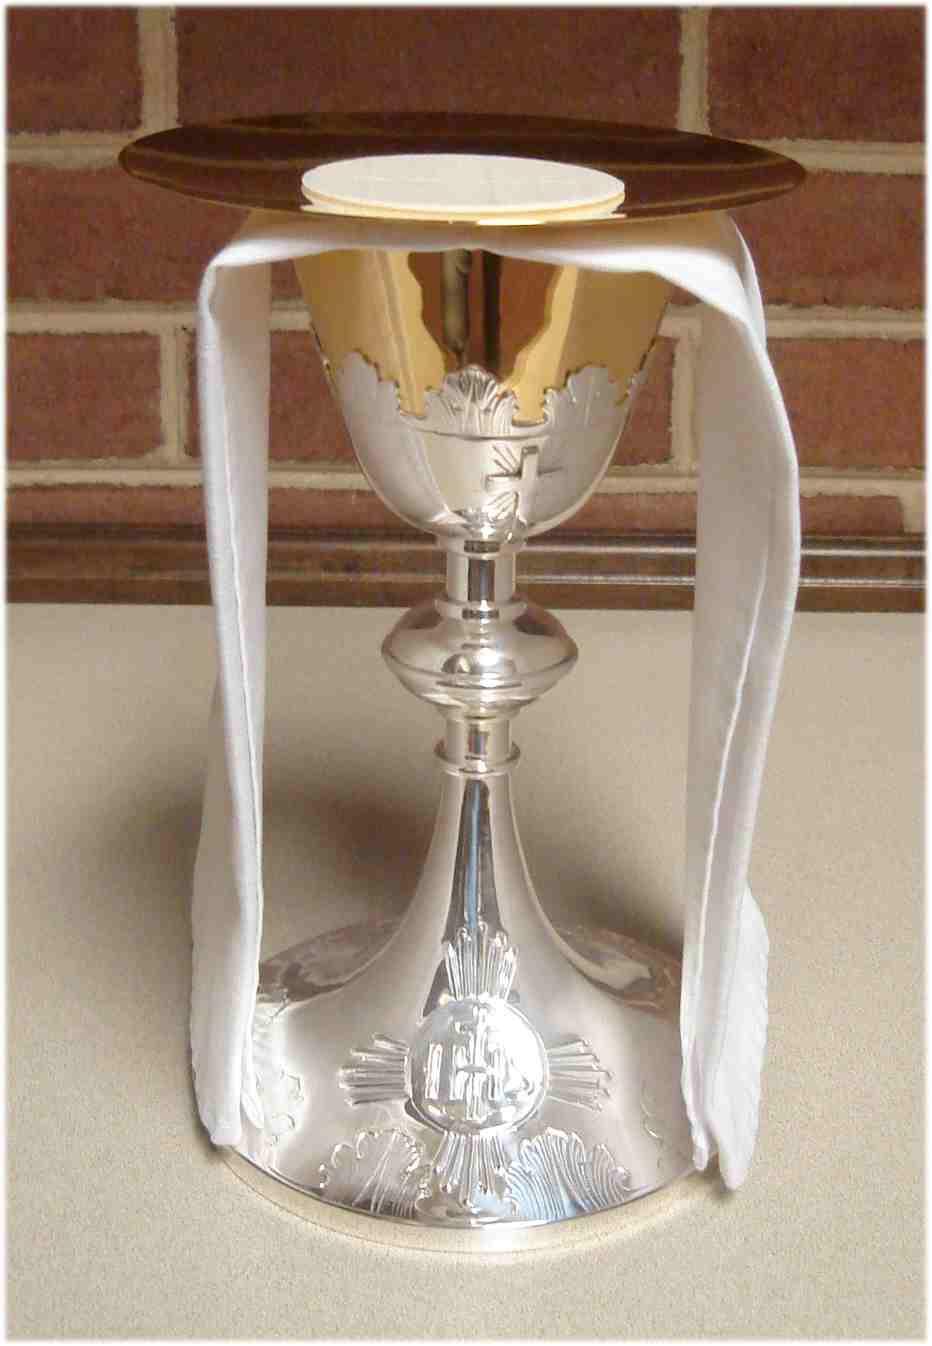 METHOD OF ASSEMBLING CHALICE AND PATEN ATTACHMENT 4 Ministers-In-Charge for Masses in which the Celebrant uses a Chalice and matching Paten should assemble the same on the credence table as follows: